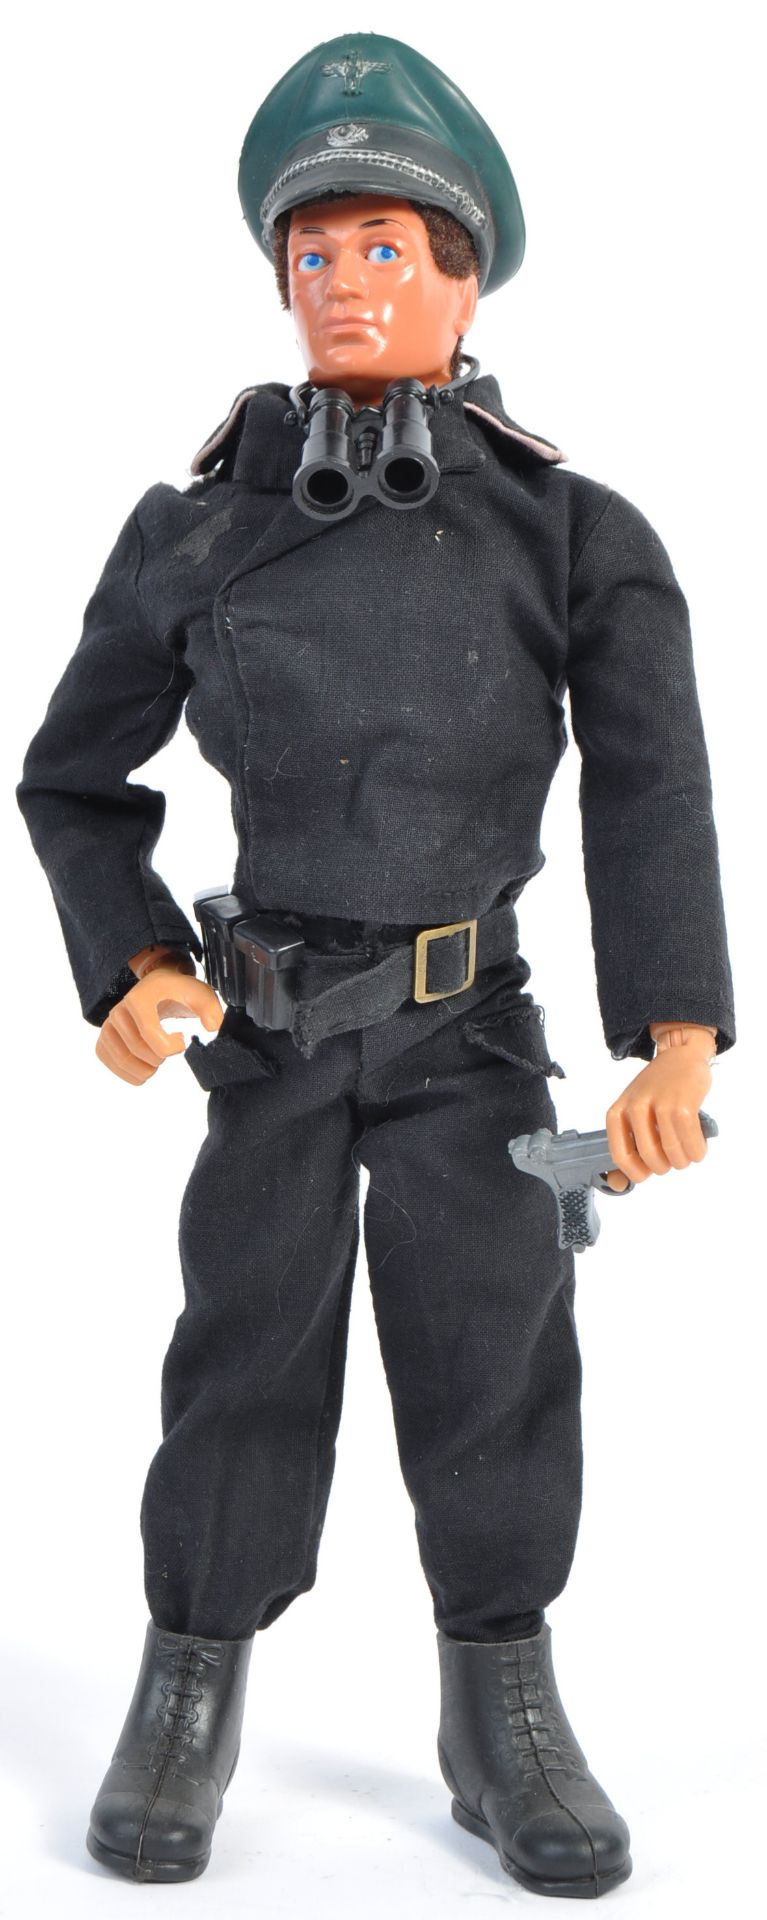 ORIGINAL VINTAGE PALITOY ACTION MAN SOLDIER & OUTFIT